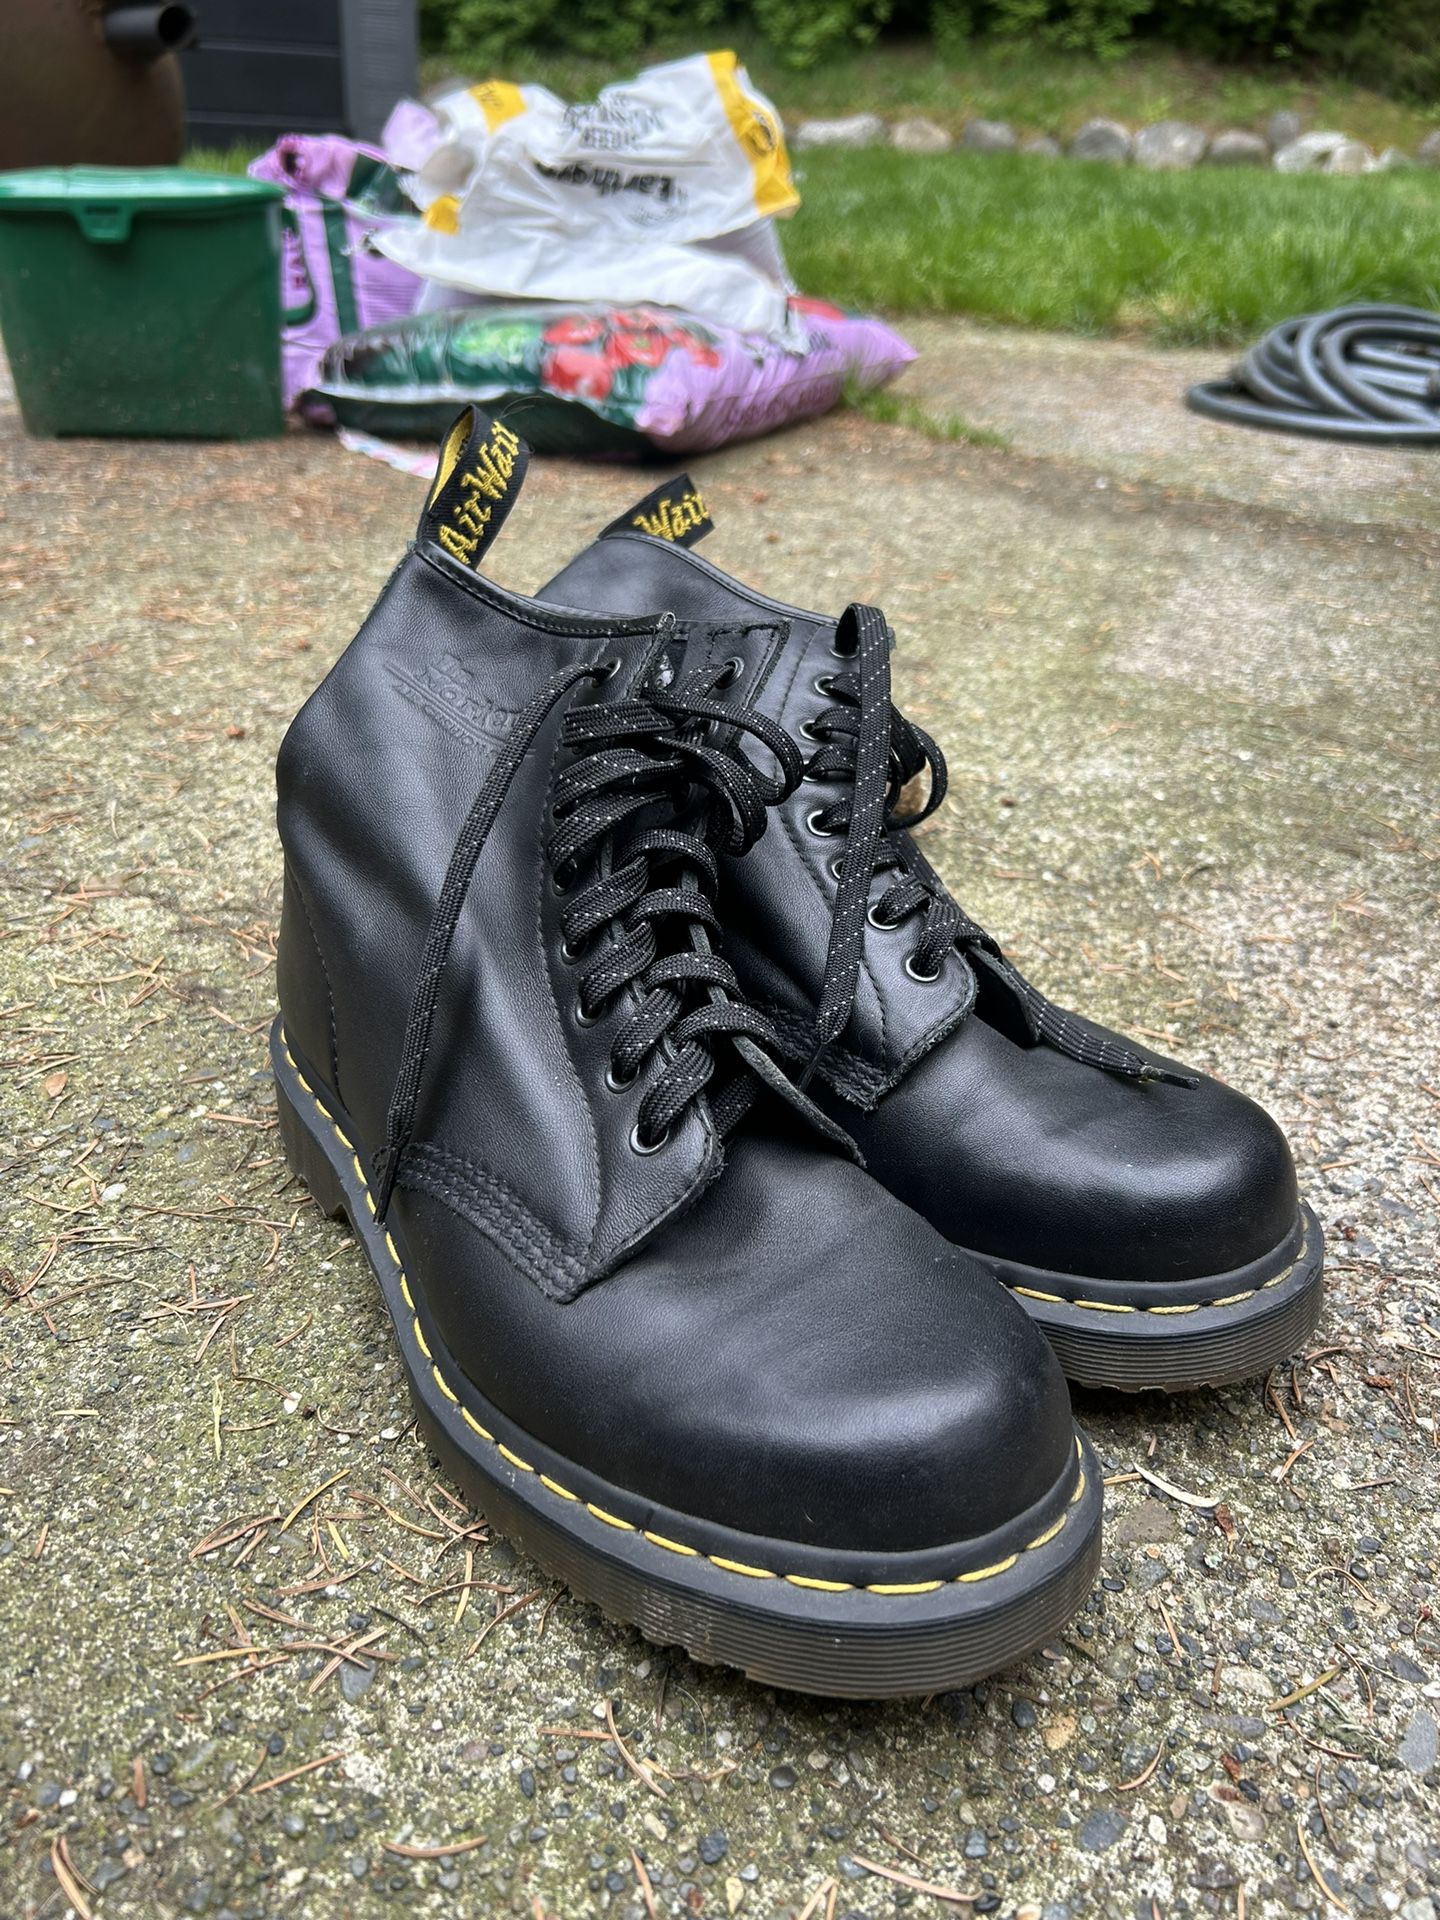 DOC MARTENS 1460 SMOOTH LEATHER BOOTS